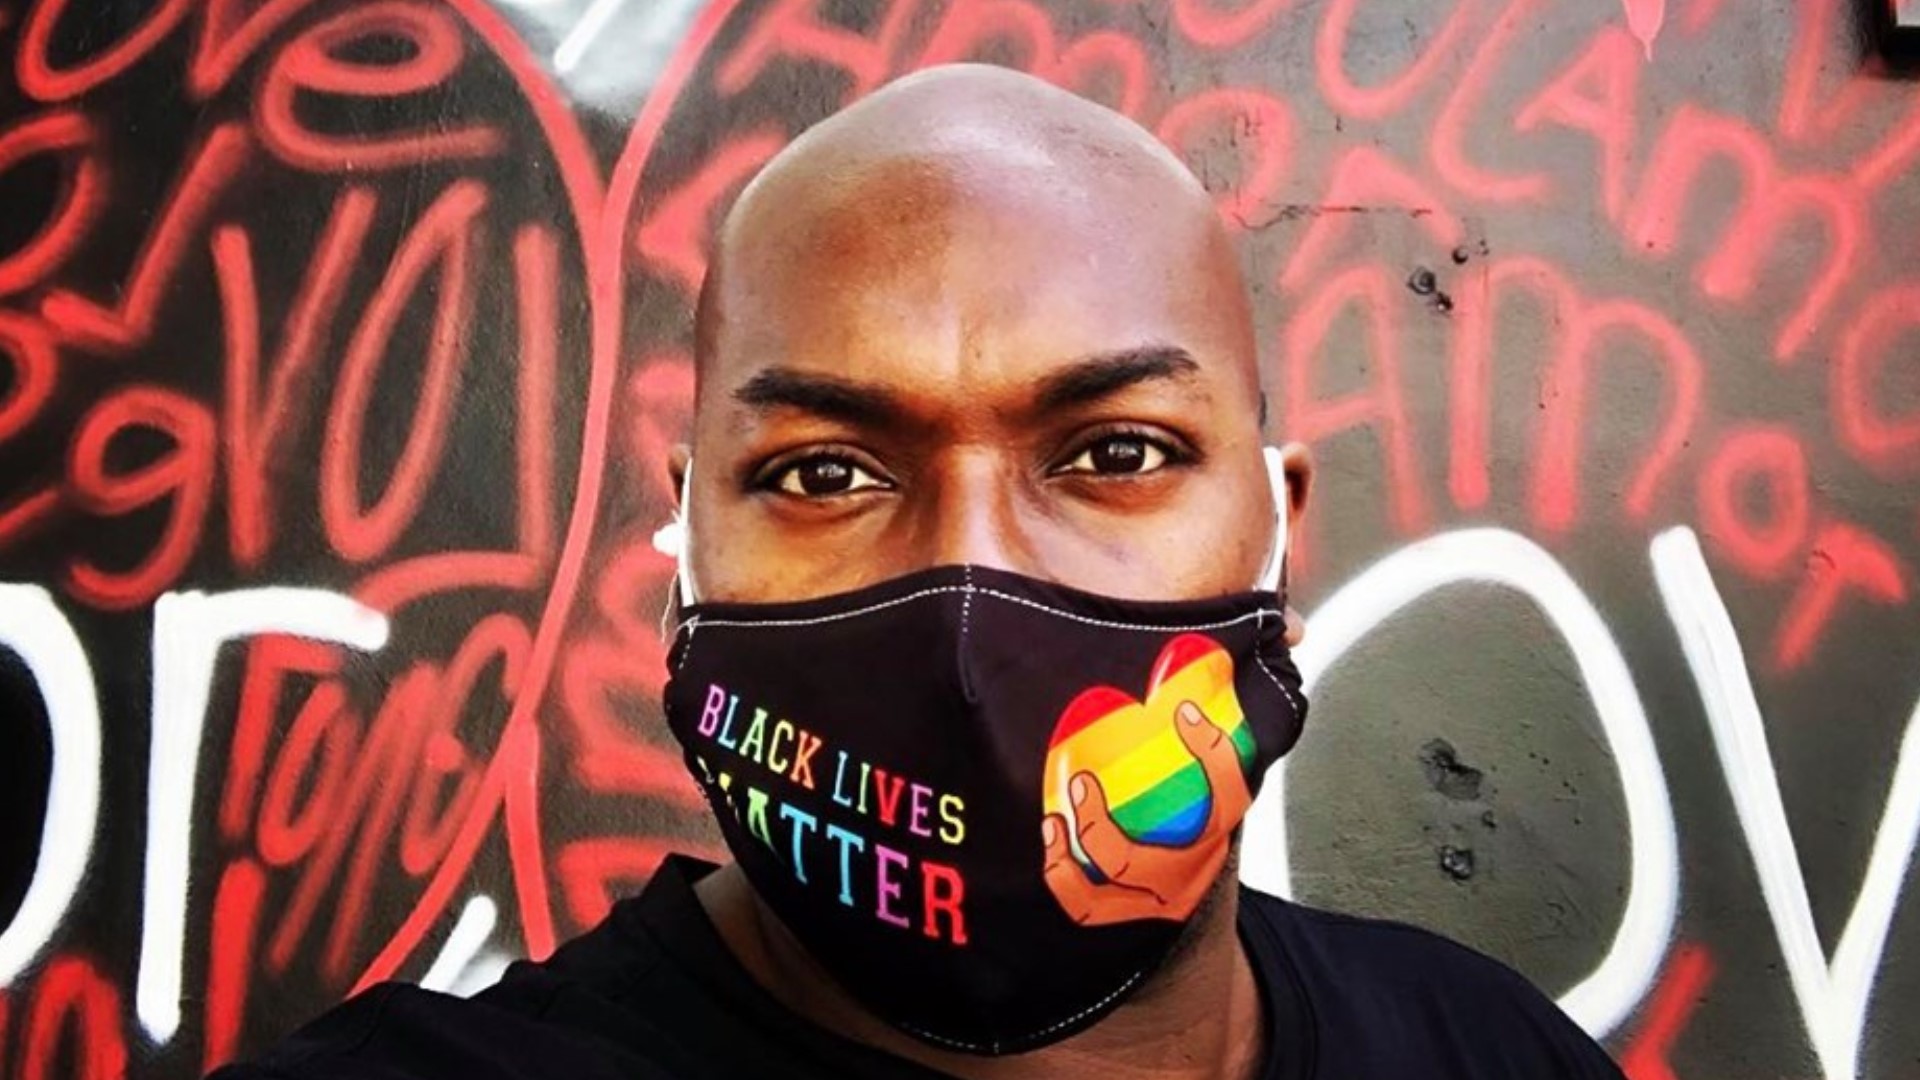 "To be visible. To be vocal. To refuse to be silent. To refuse to be silenced and to amplify stories from LGBTQ people of color." - Darian Aaron